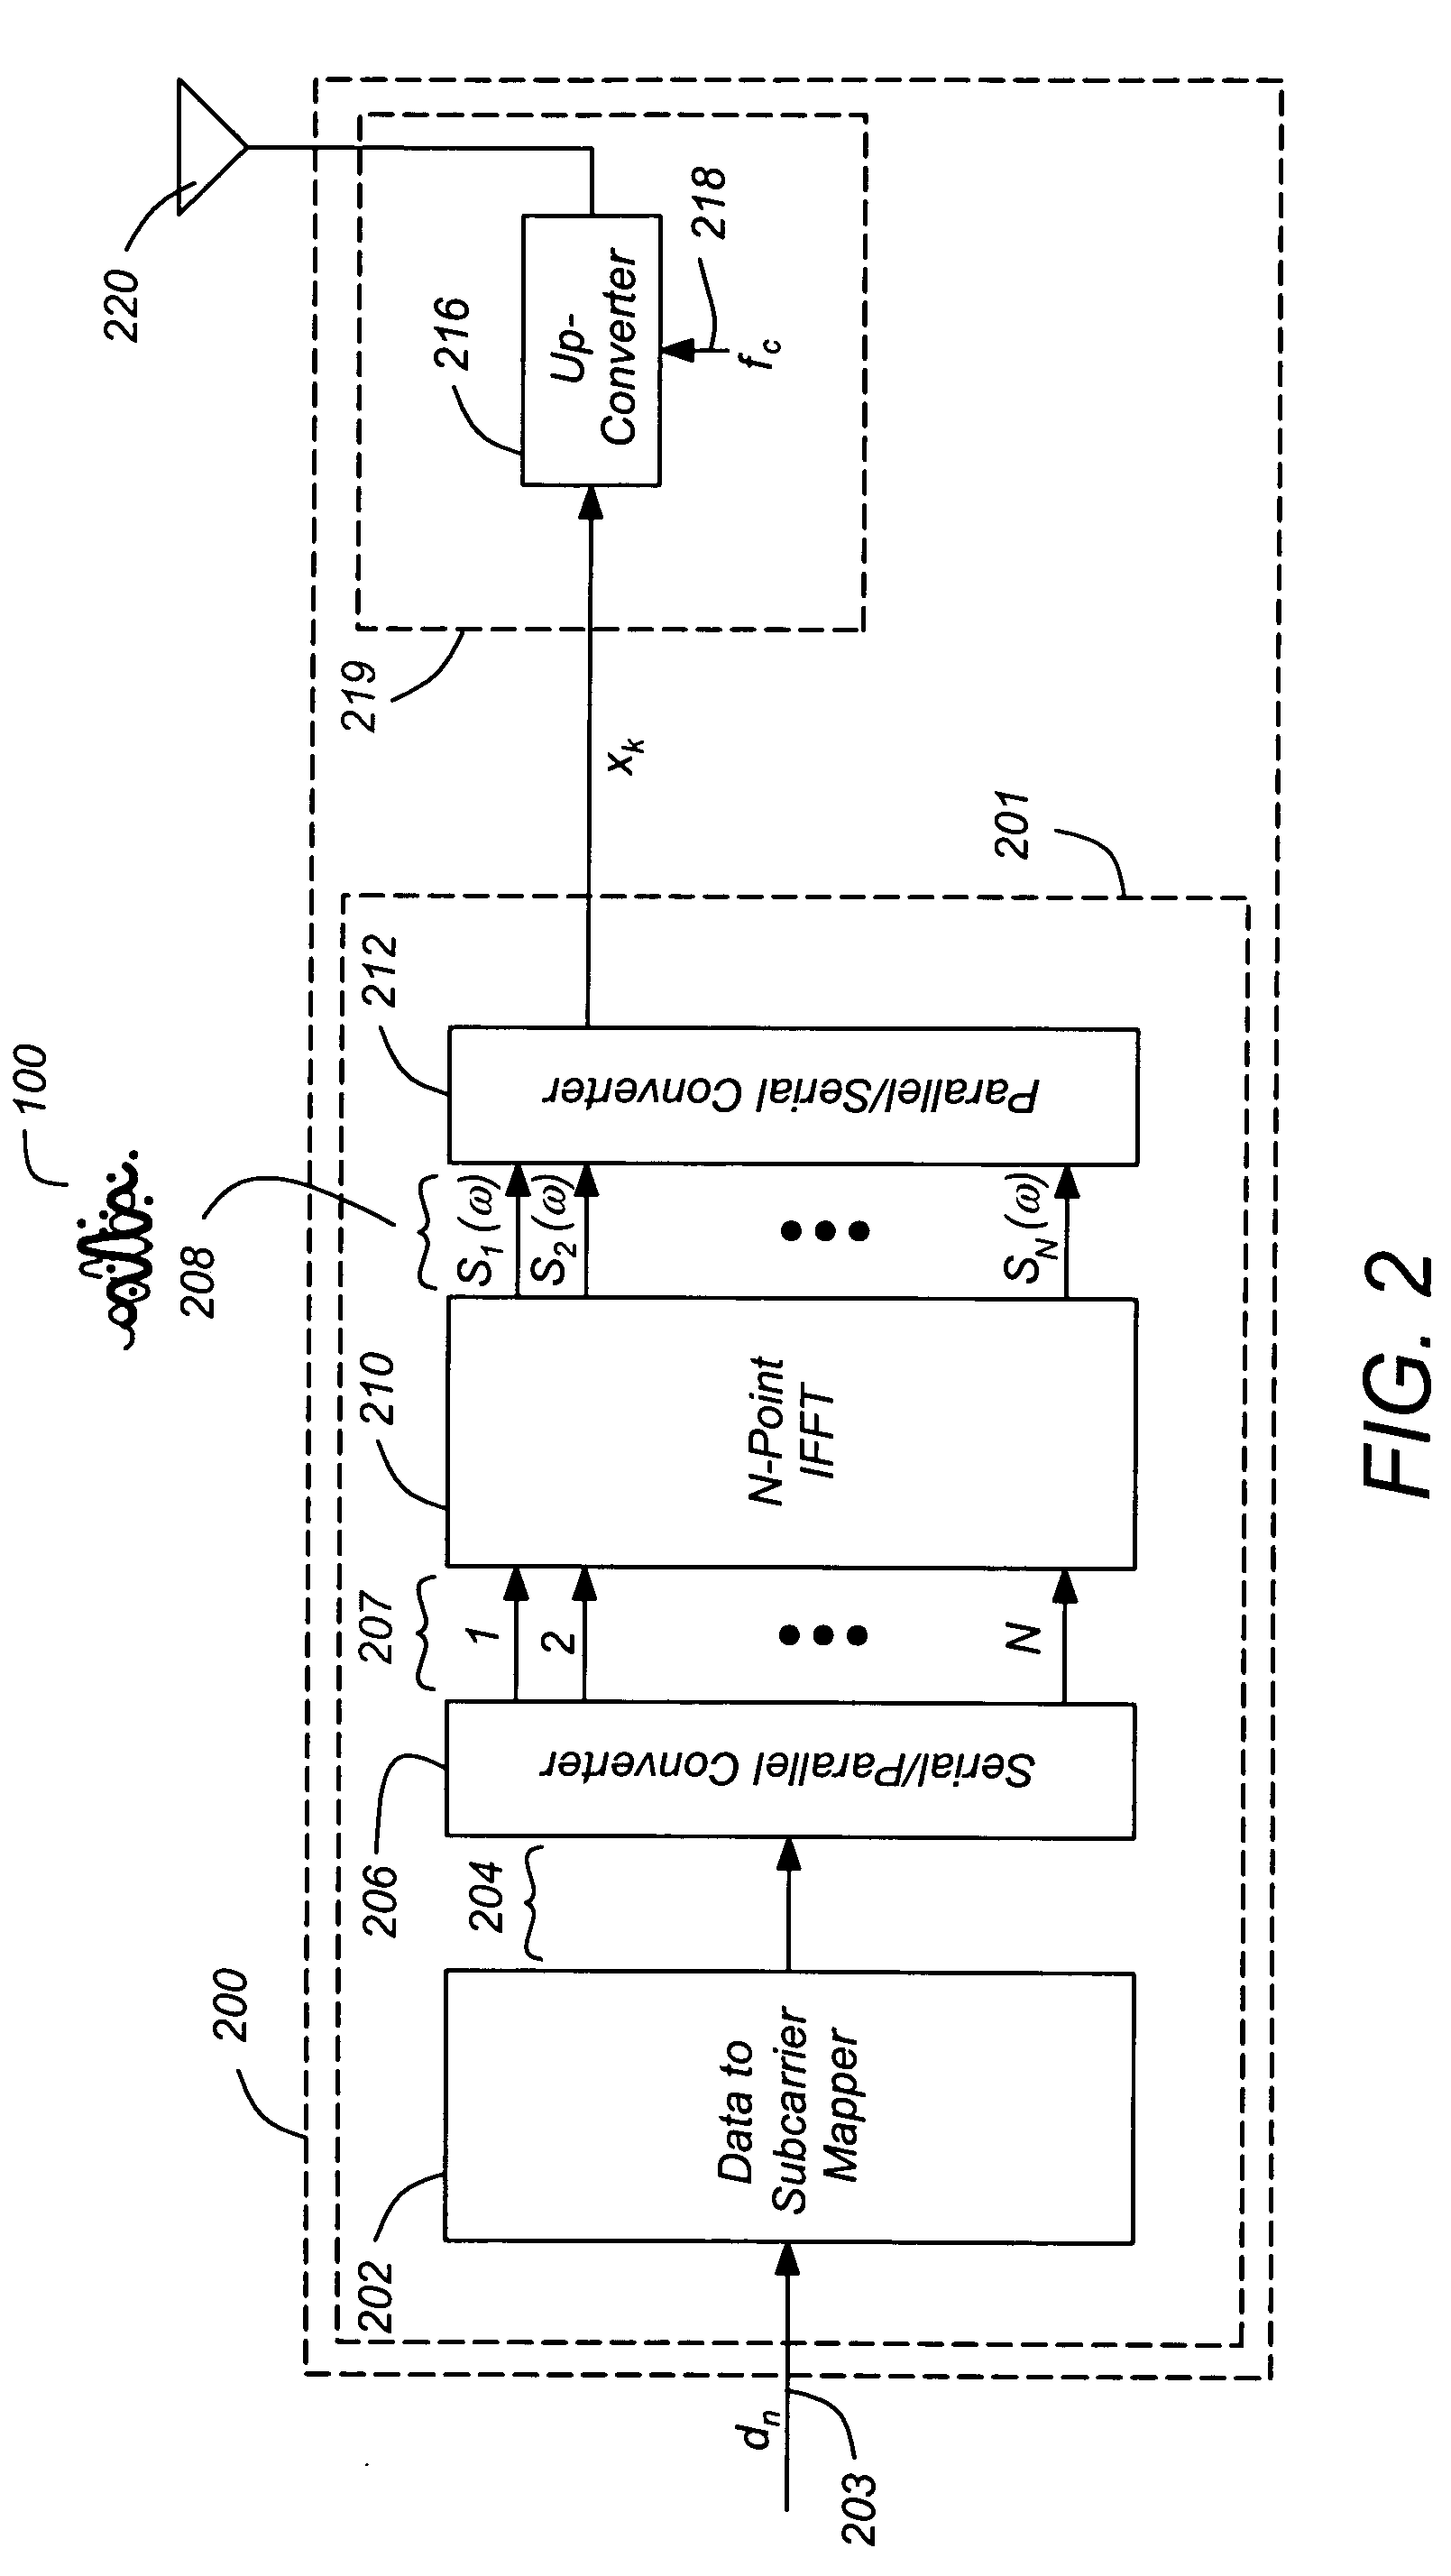 Method and apparatus for canceling intercarrier interference through conjugate transmission for multicarrier communication systems